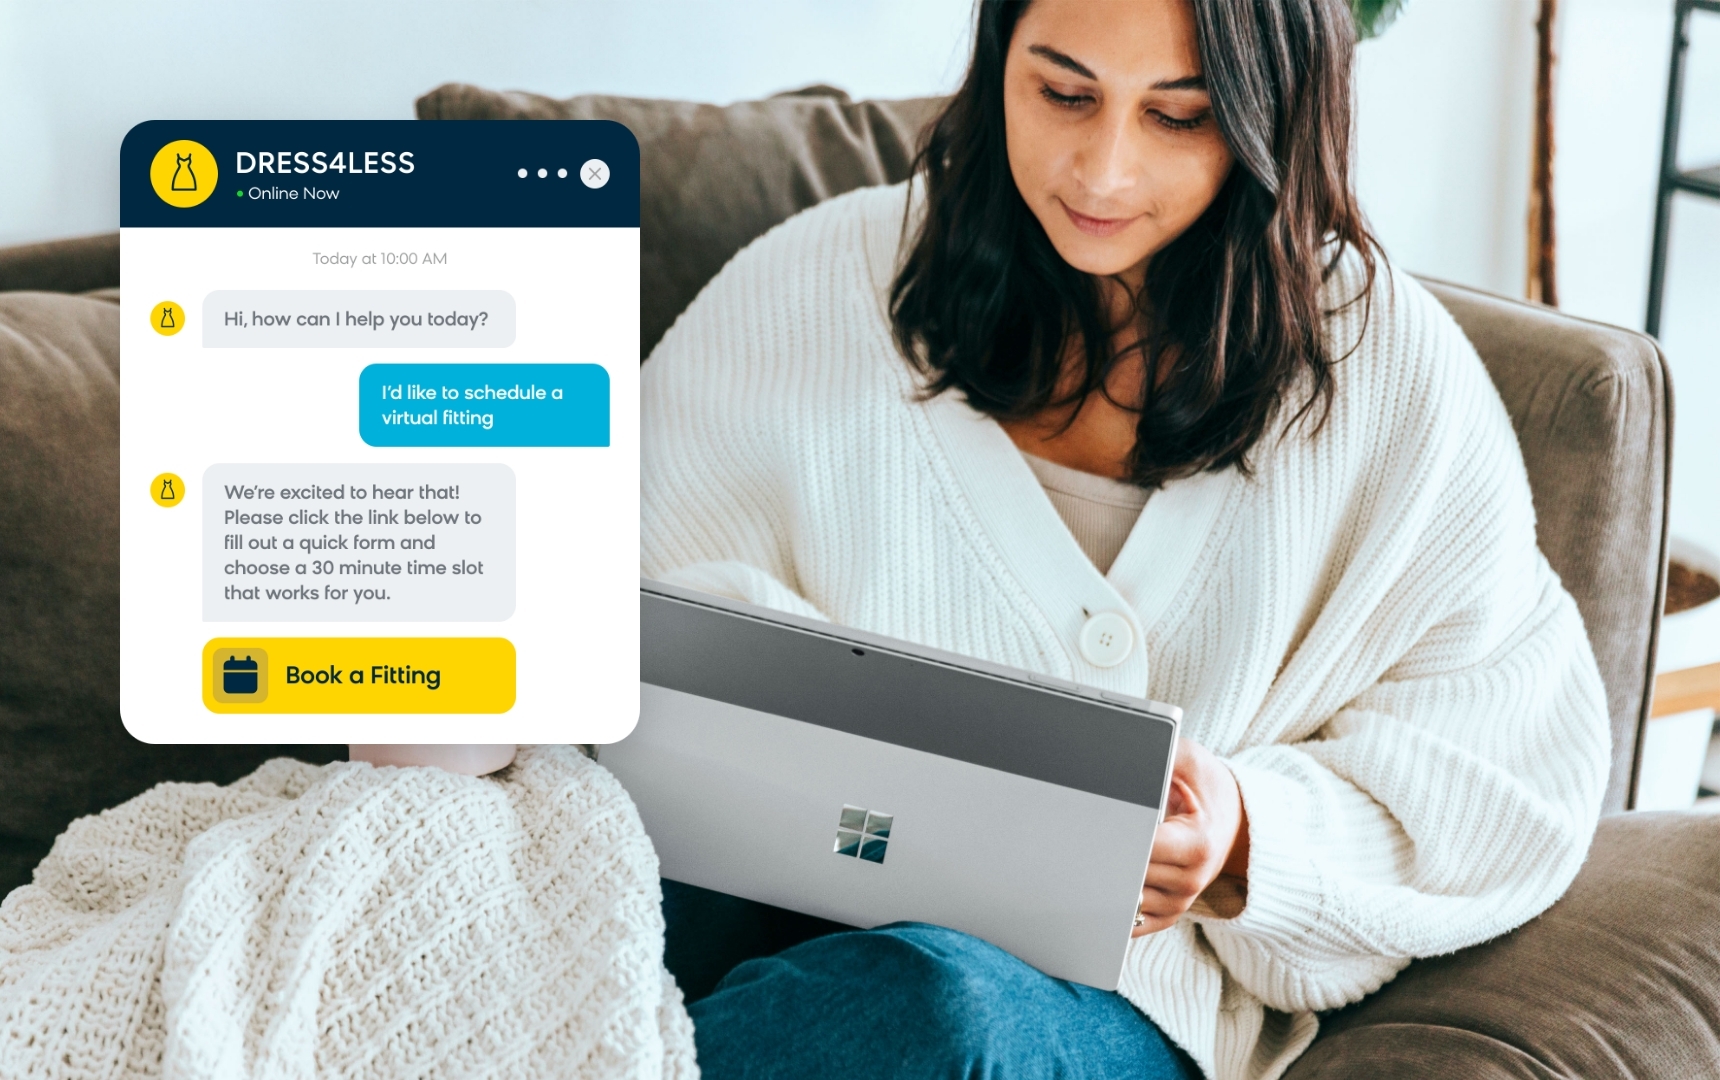 Example of AI personalization with AI-powered chatbots